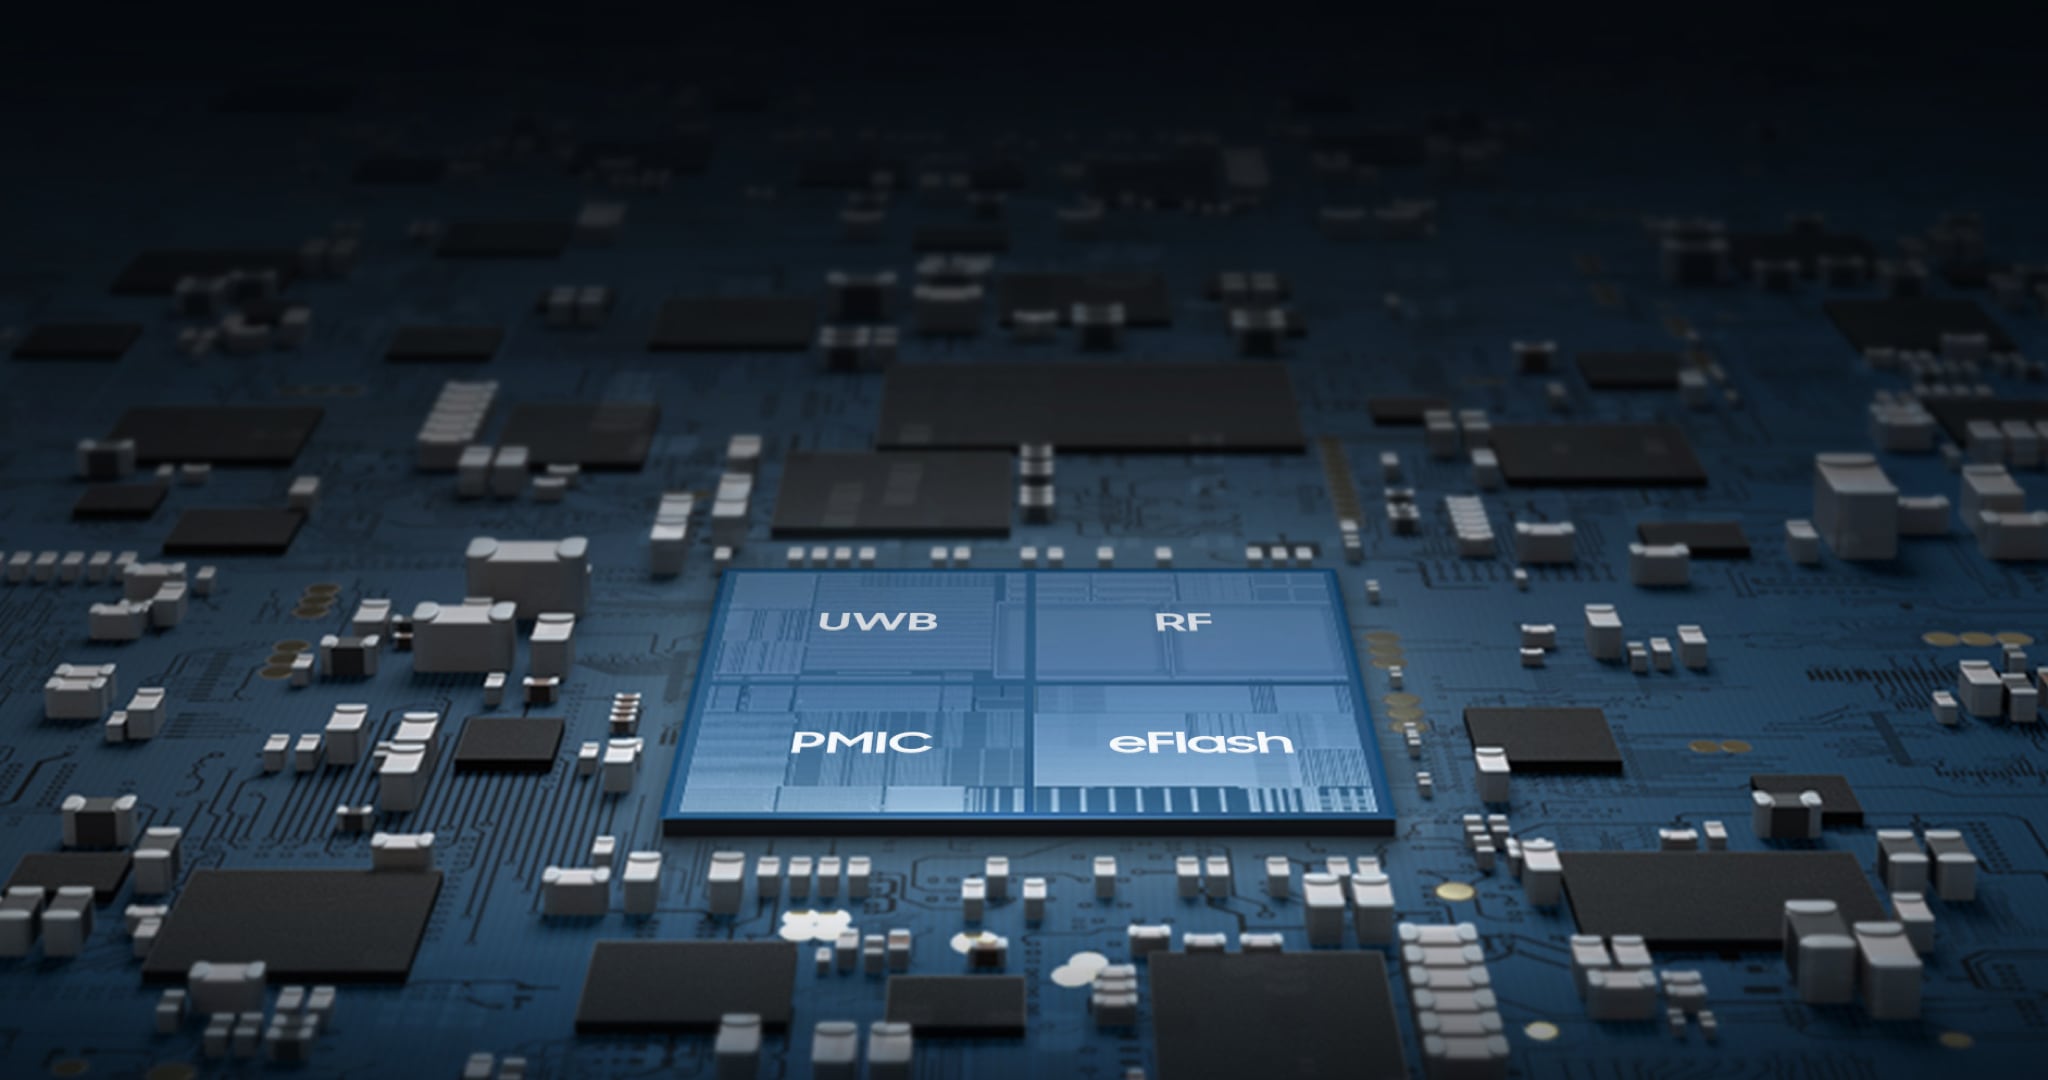 Equipped with built-in UWB, RFIC, PMIC, and eFlash, the Samsung Exynos Connect U100 is versatile across various devices.